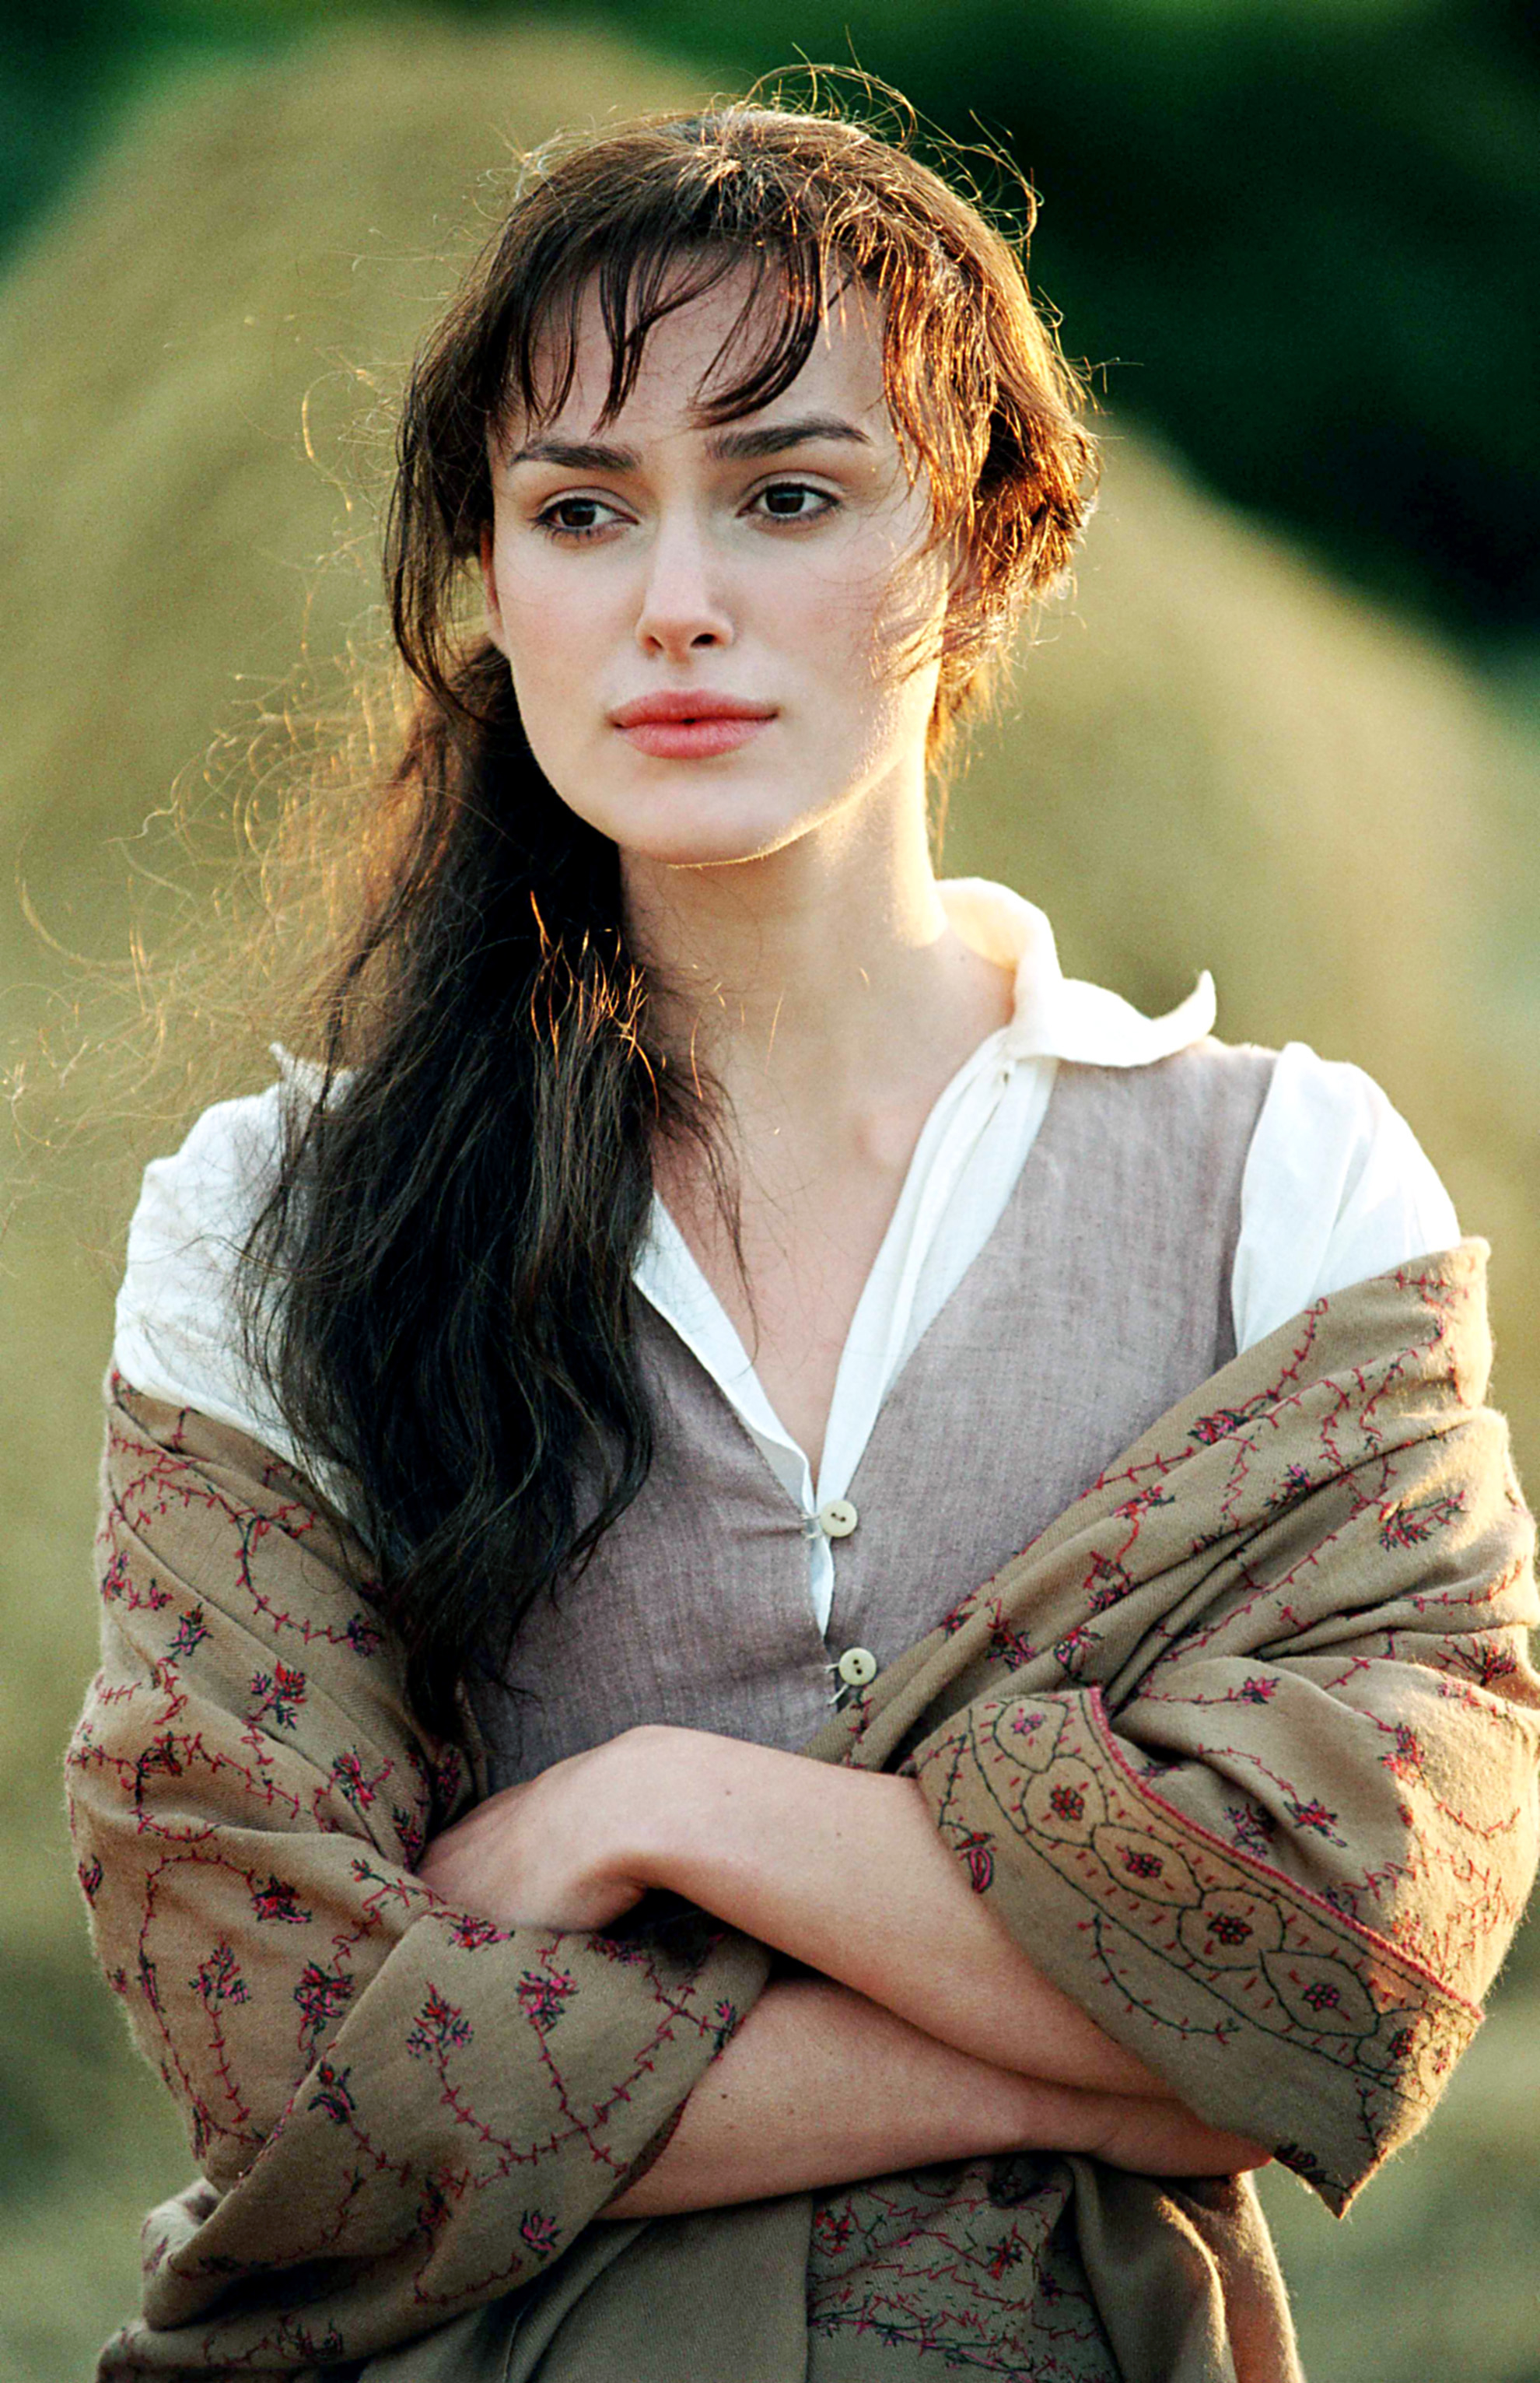 Elizabeth Bennet from Pride and Prejudice in a historical dress, looking thoughtful